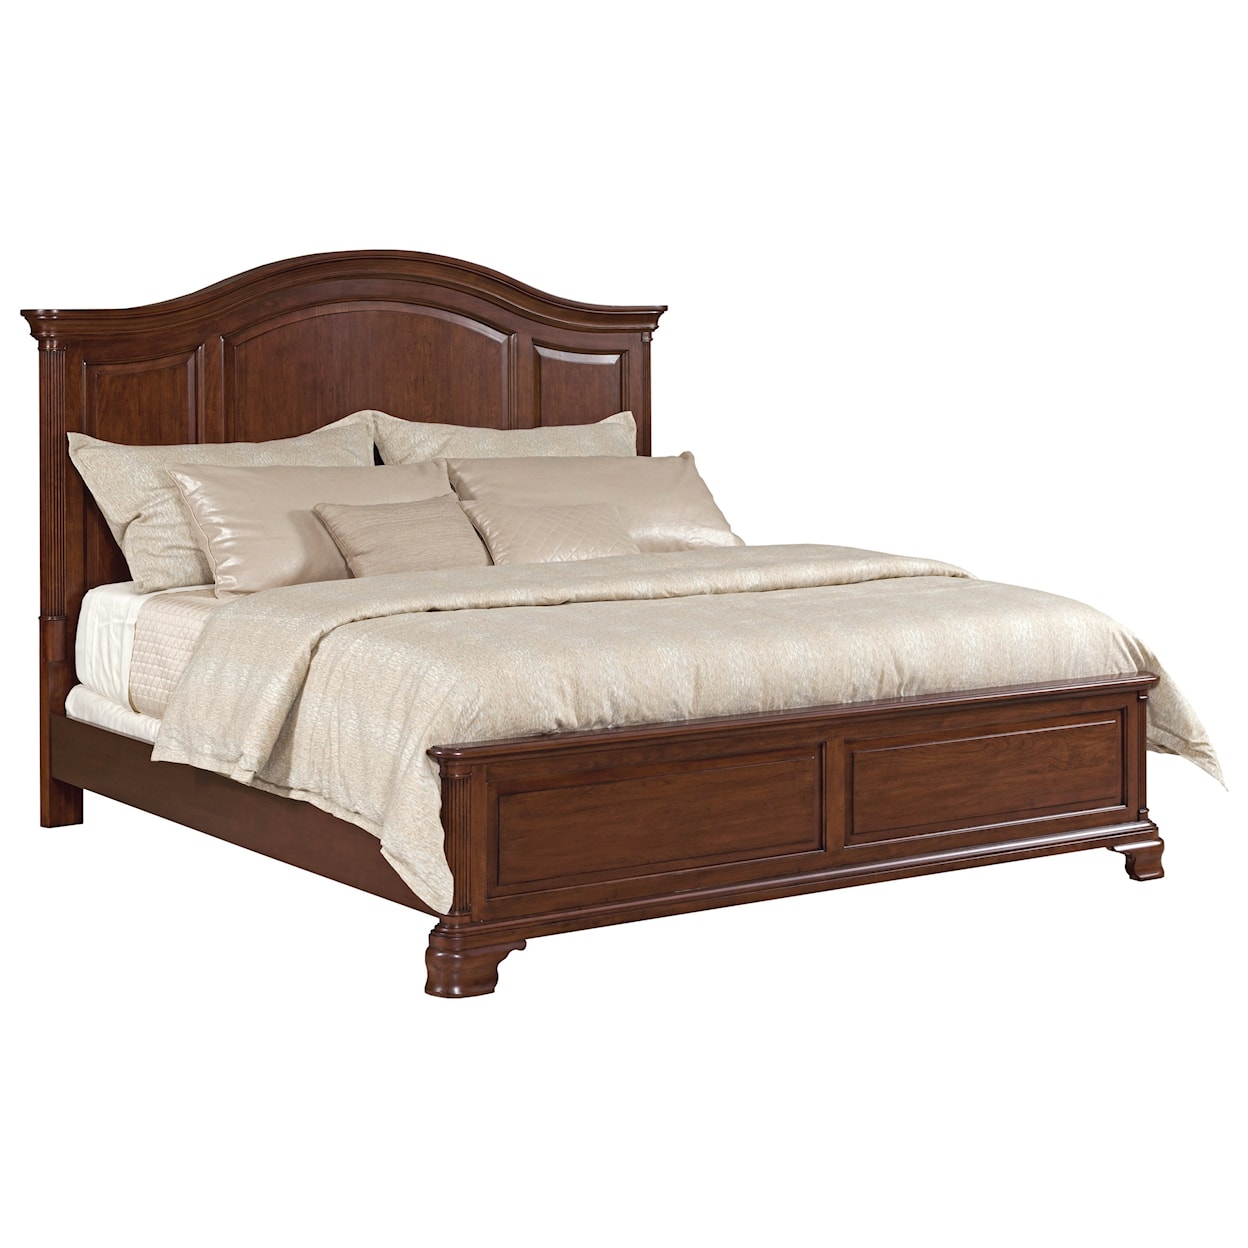 Kincaid Furniture Hadleigh Arched Panel Bed 4/6-5/0 Queen Package